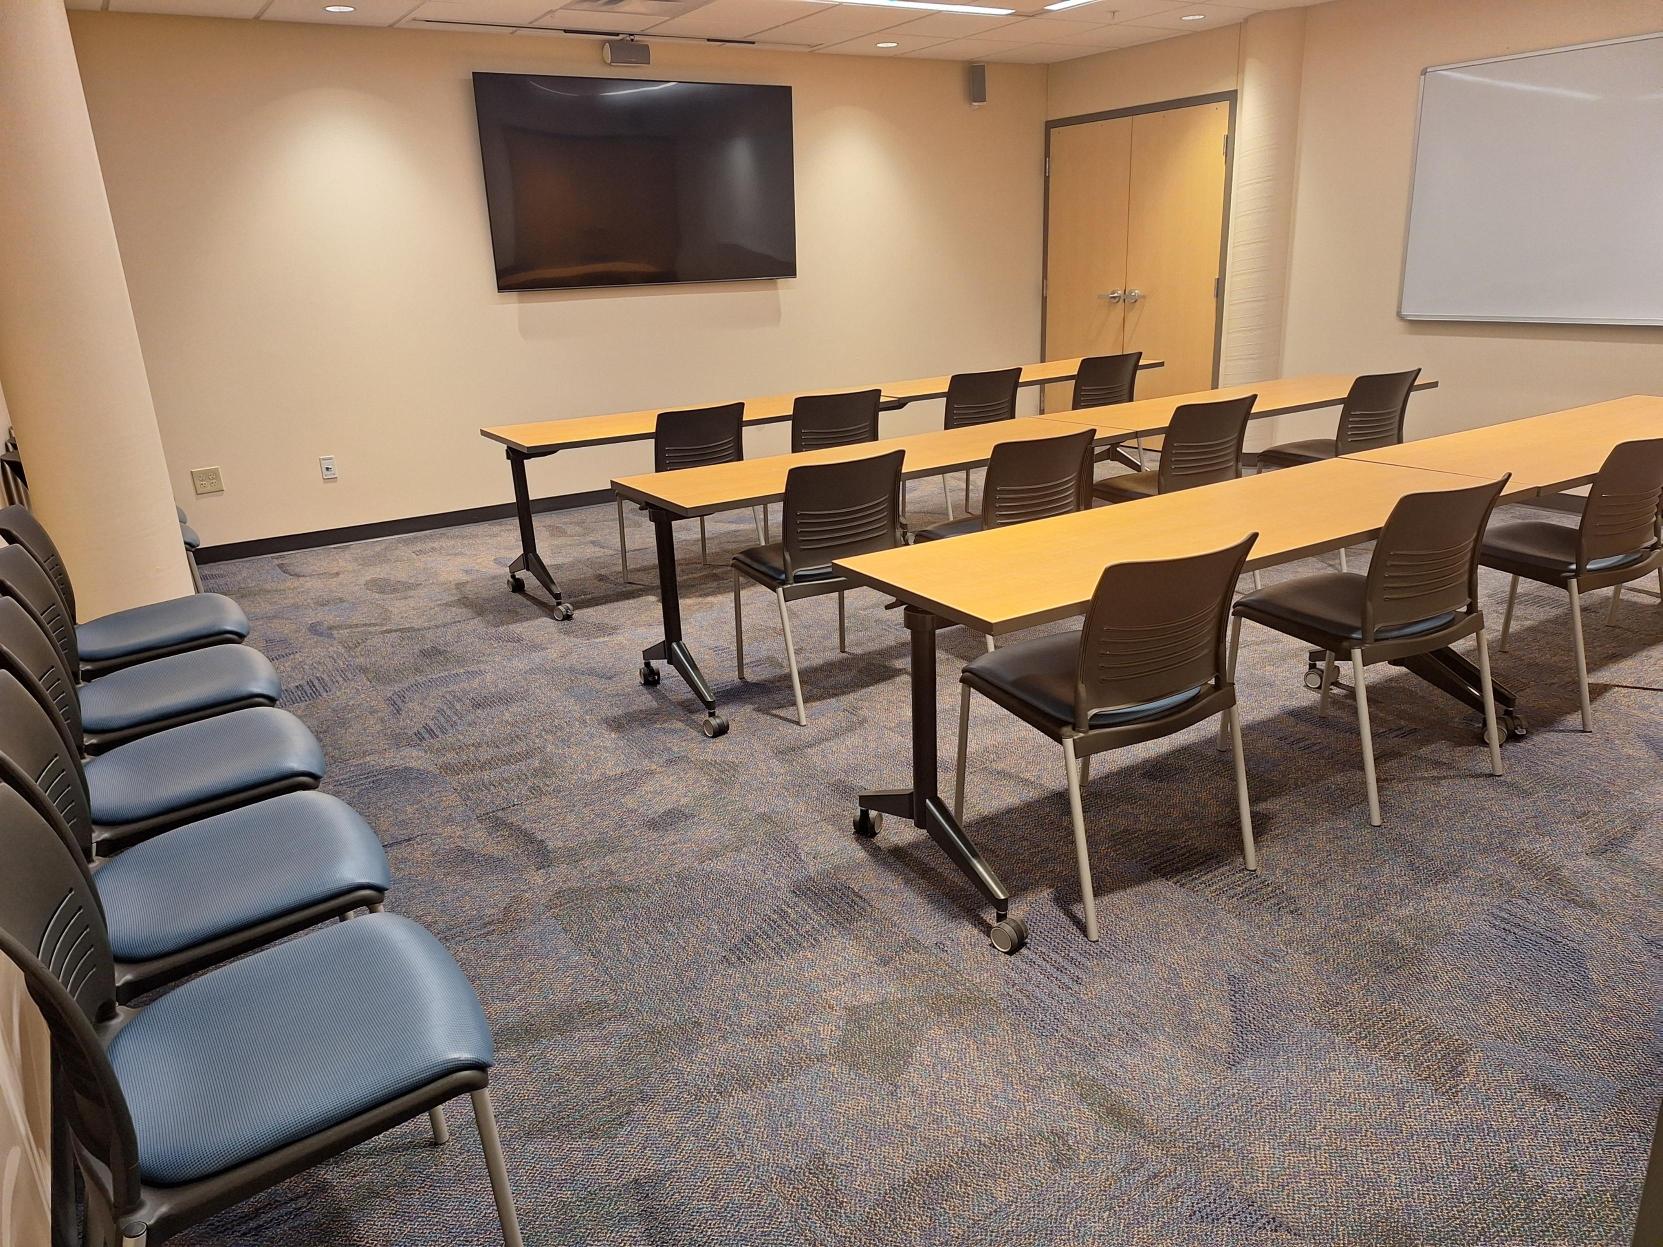 Chambers meeting room set school style with tables, chairs, TV display, and whiteboard